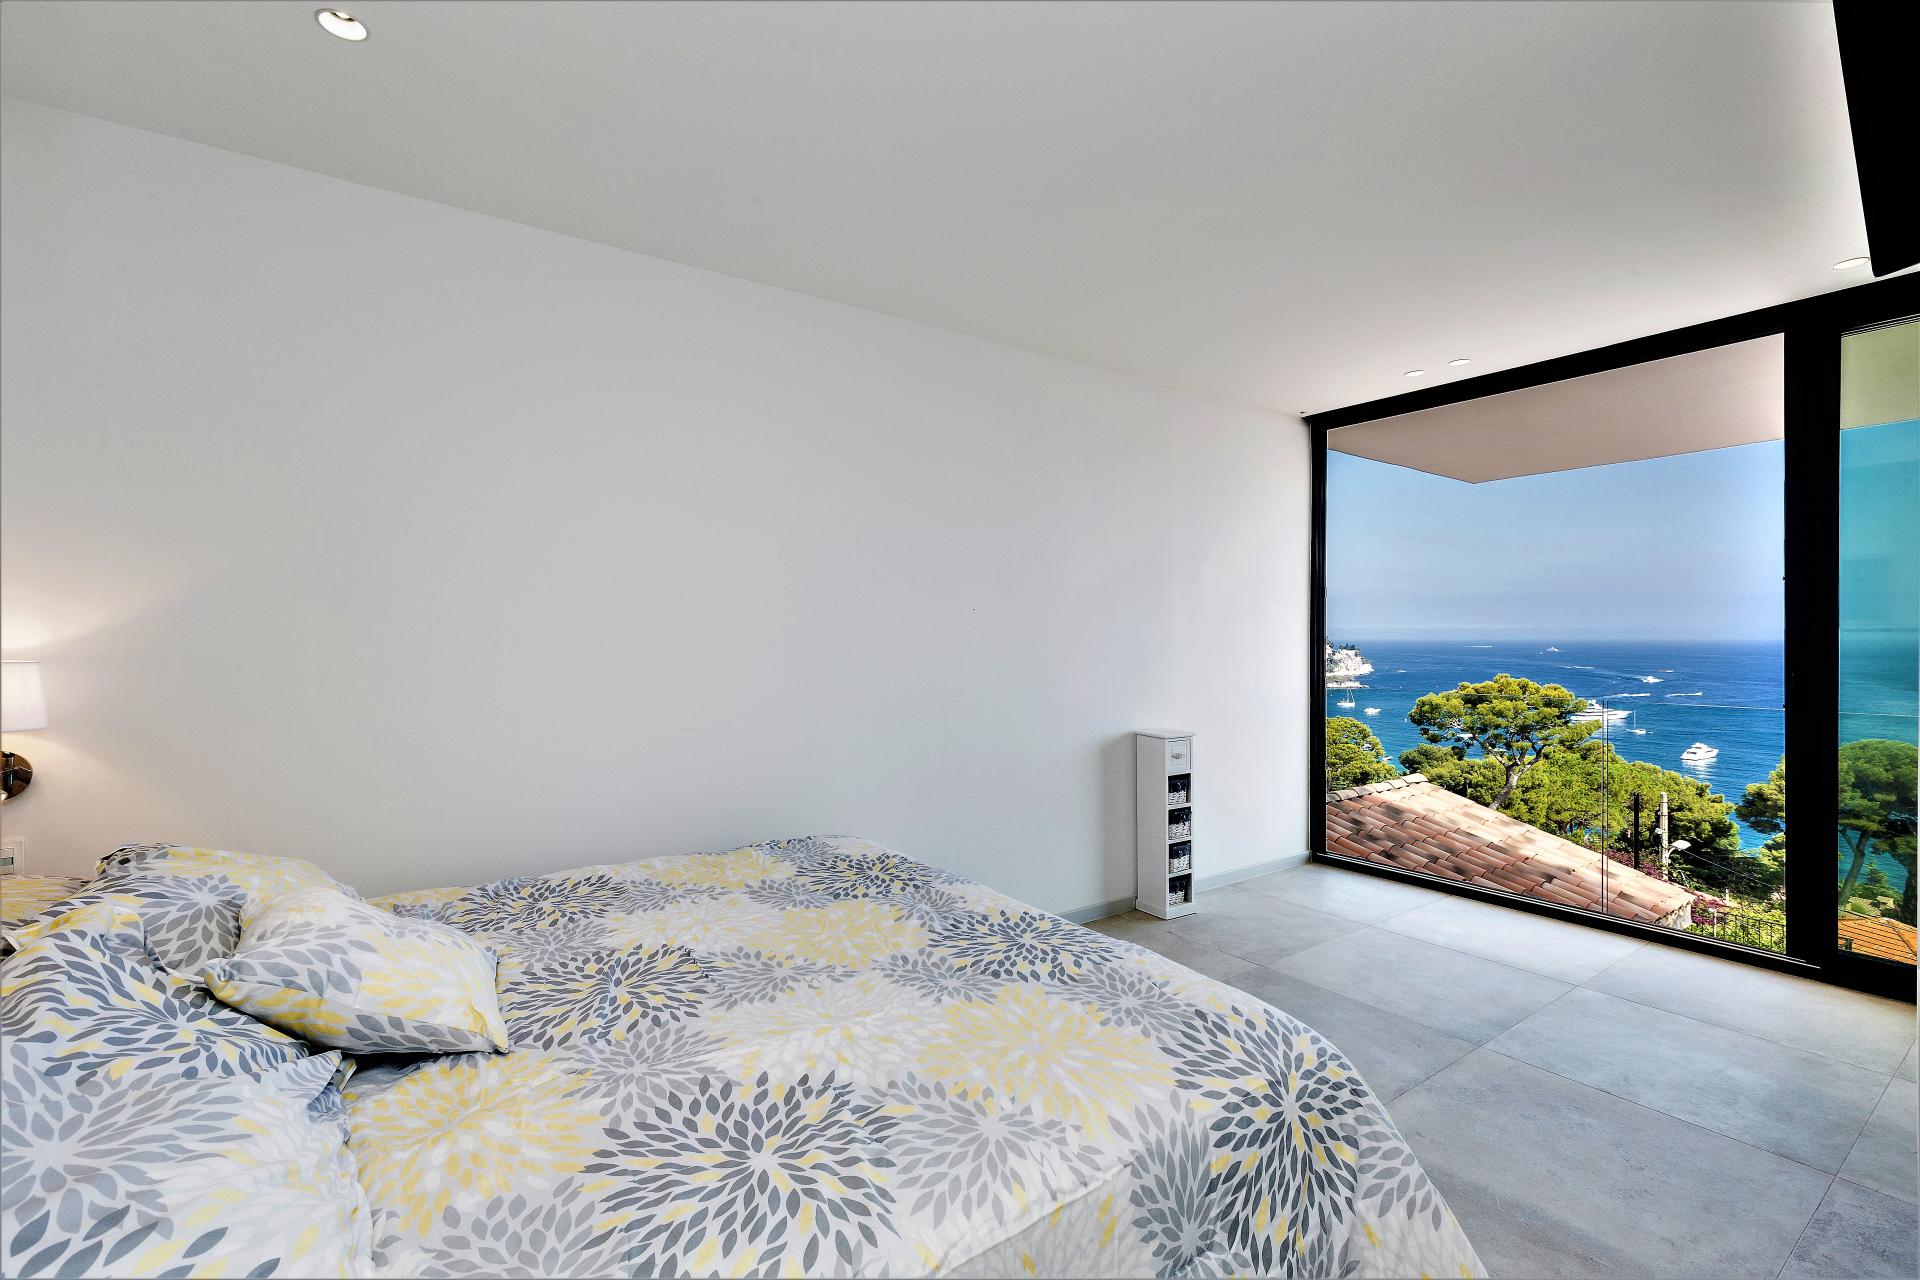 ANOTHER BEDROOM WITH SEA VIEWS IN INFINITY VILLA